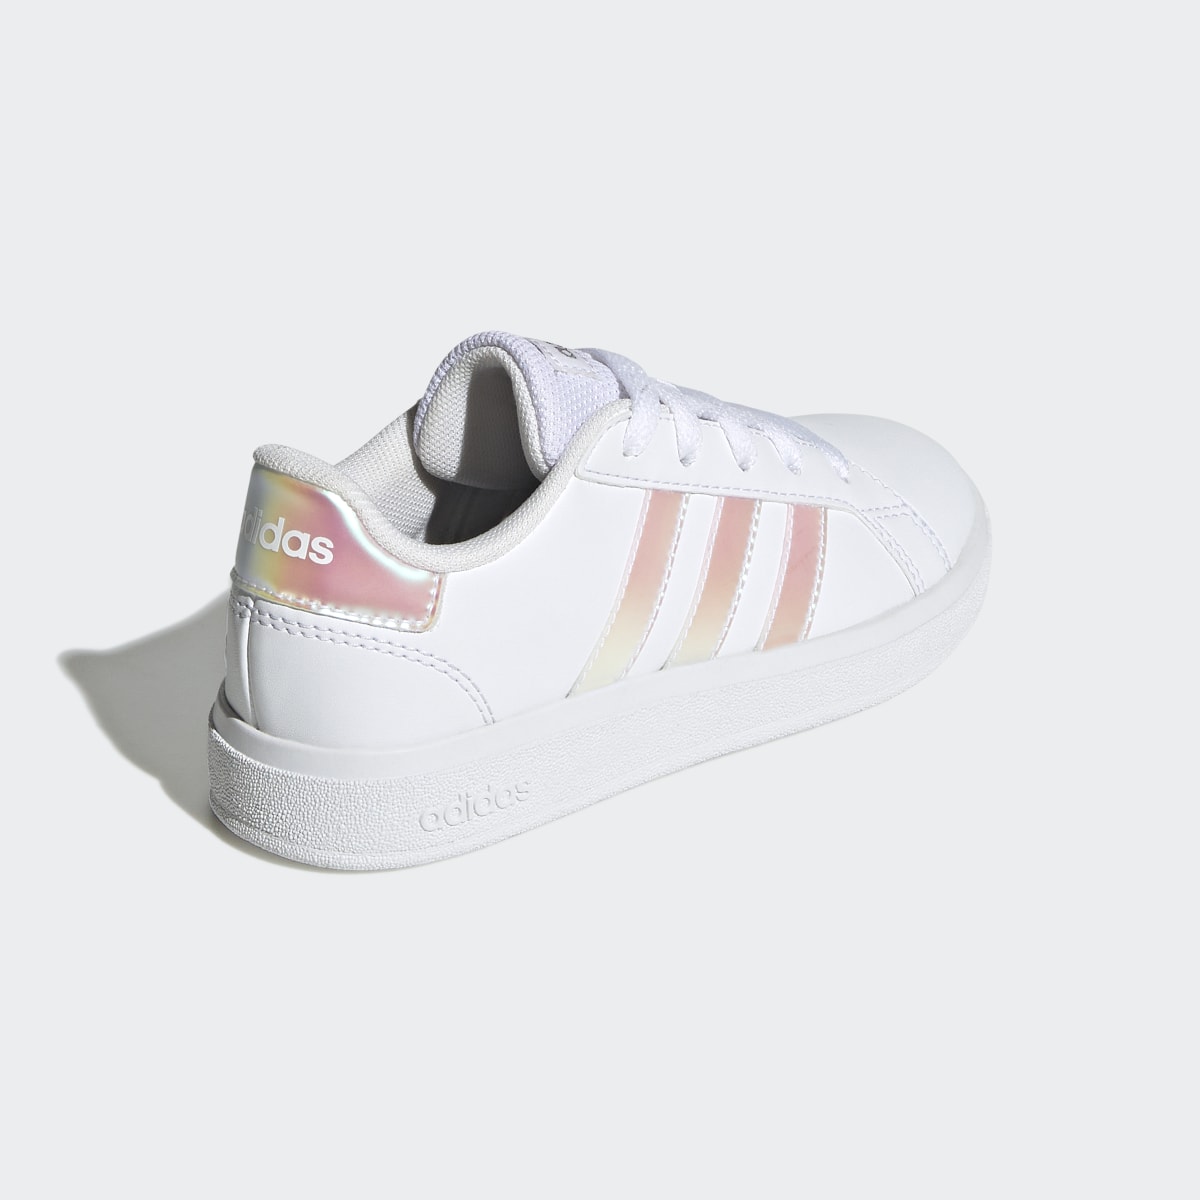 Adidas Grand Court Lifestyle Lace Tennis Schuh. 6